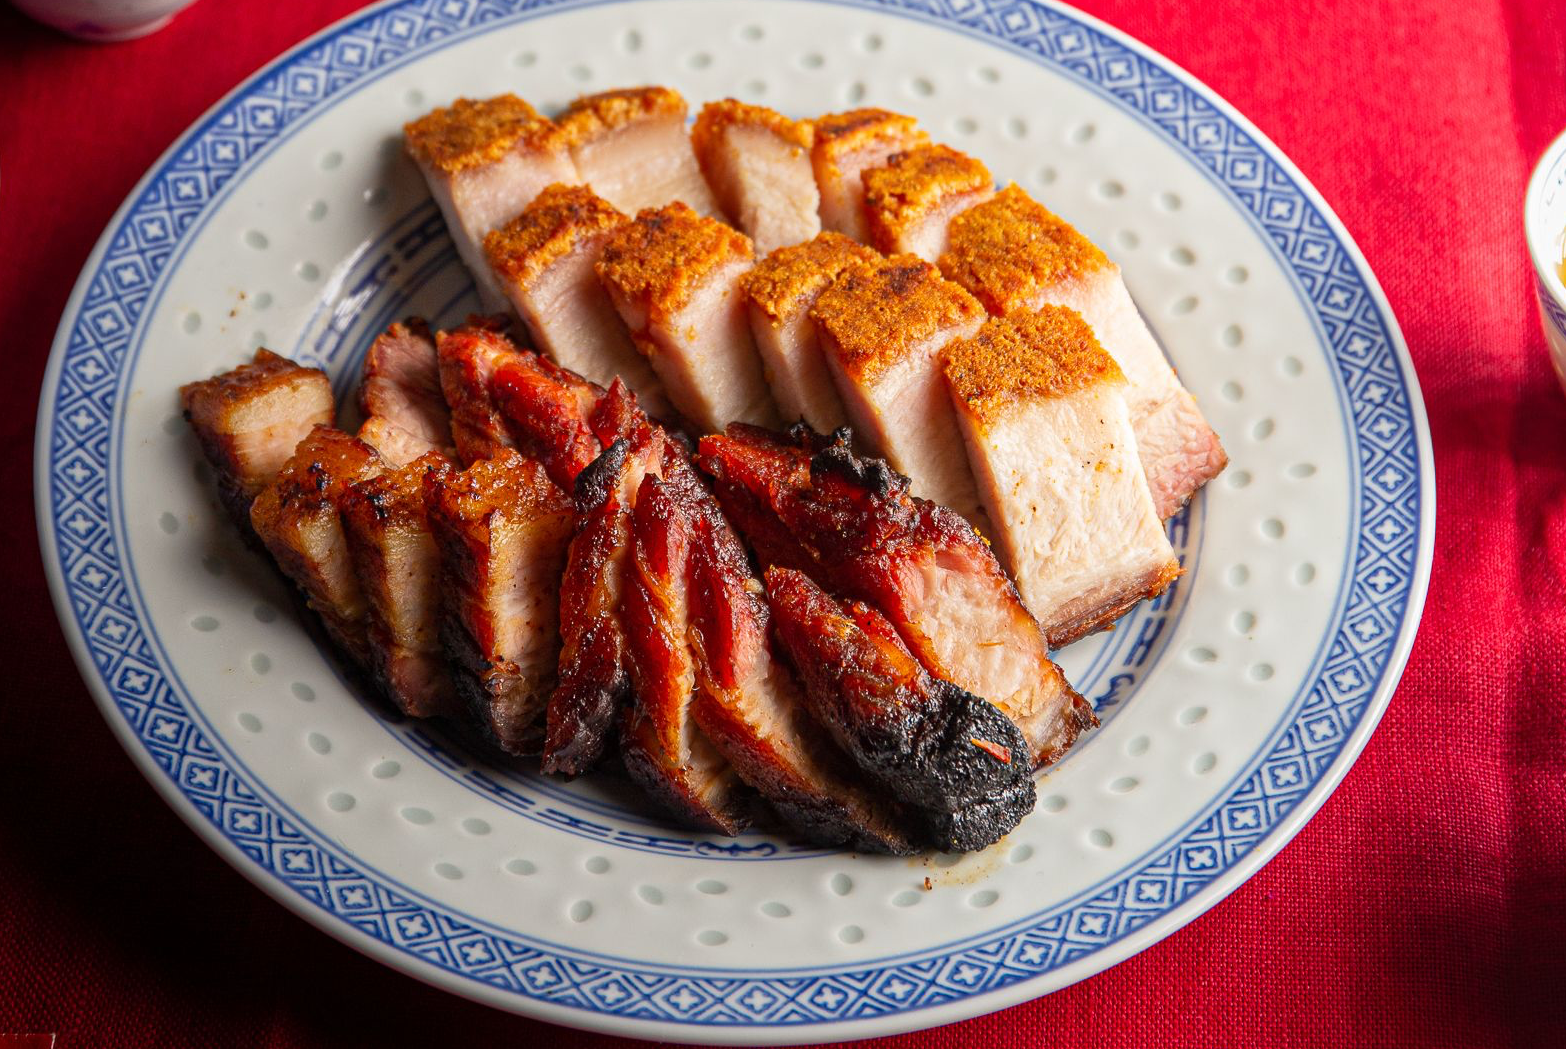 Char siu and siu yuk from Three Uncles on a white and blue plate, on top of a red tablecloth